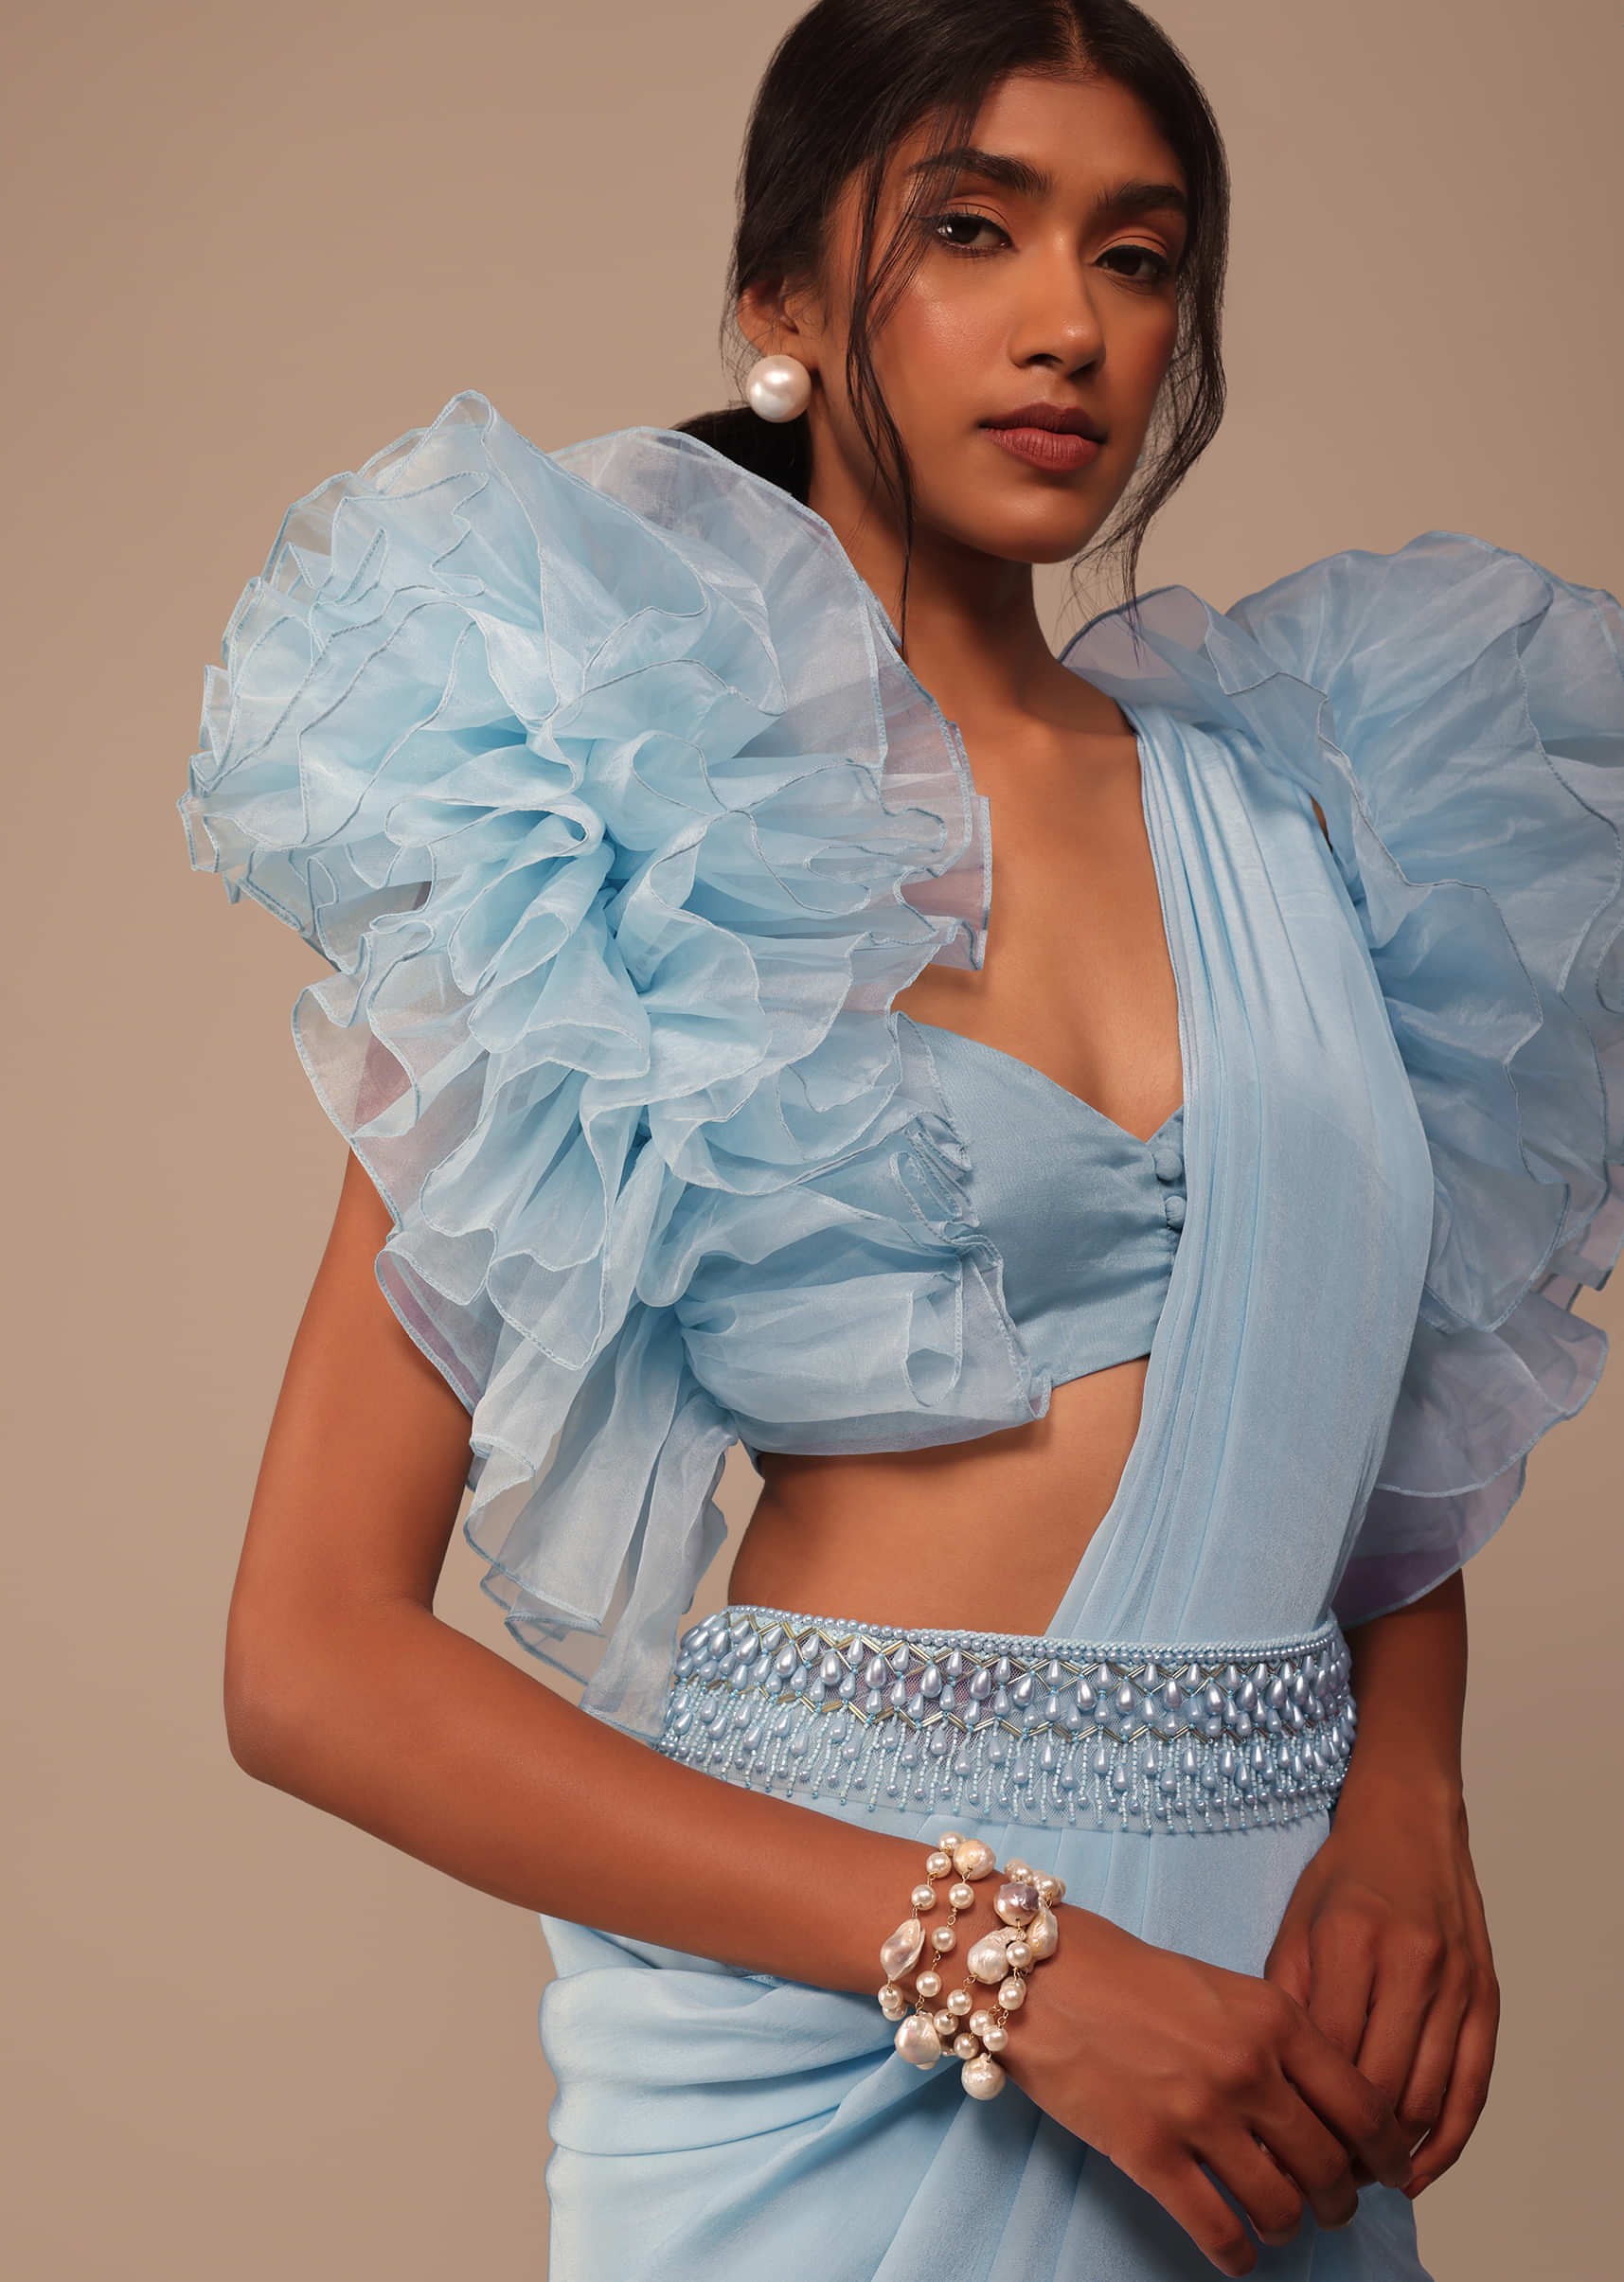 Sky Blue Saree With Organza Ruffle Blouse And Embroidered Belt